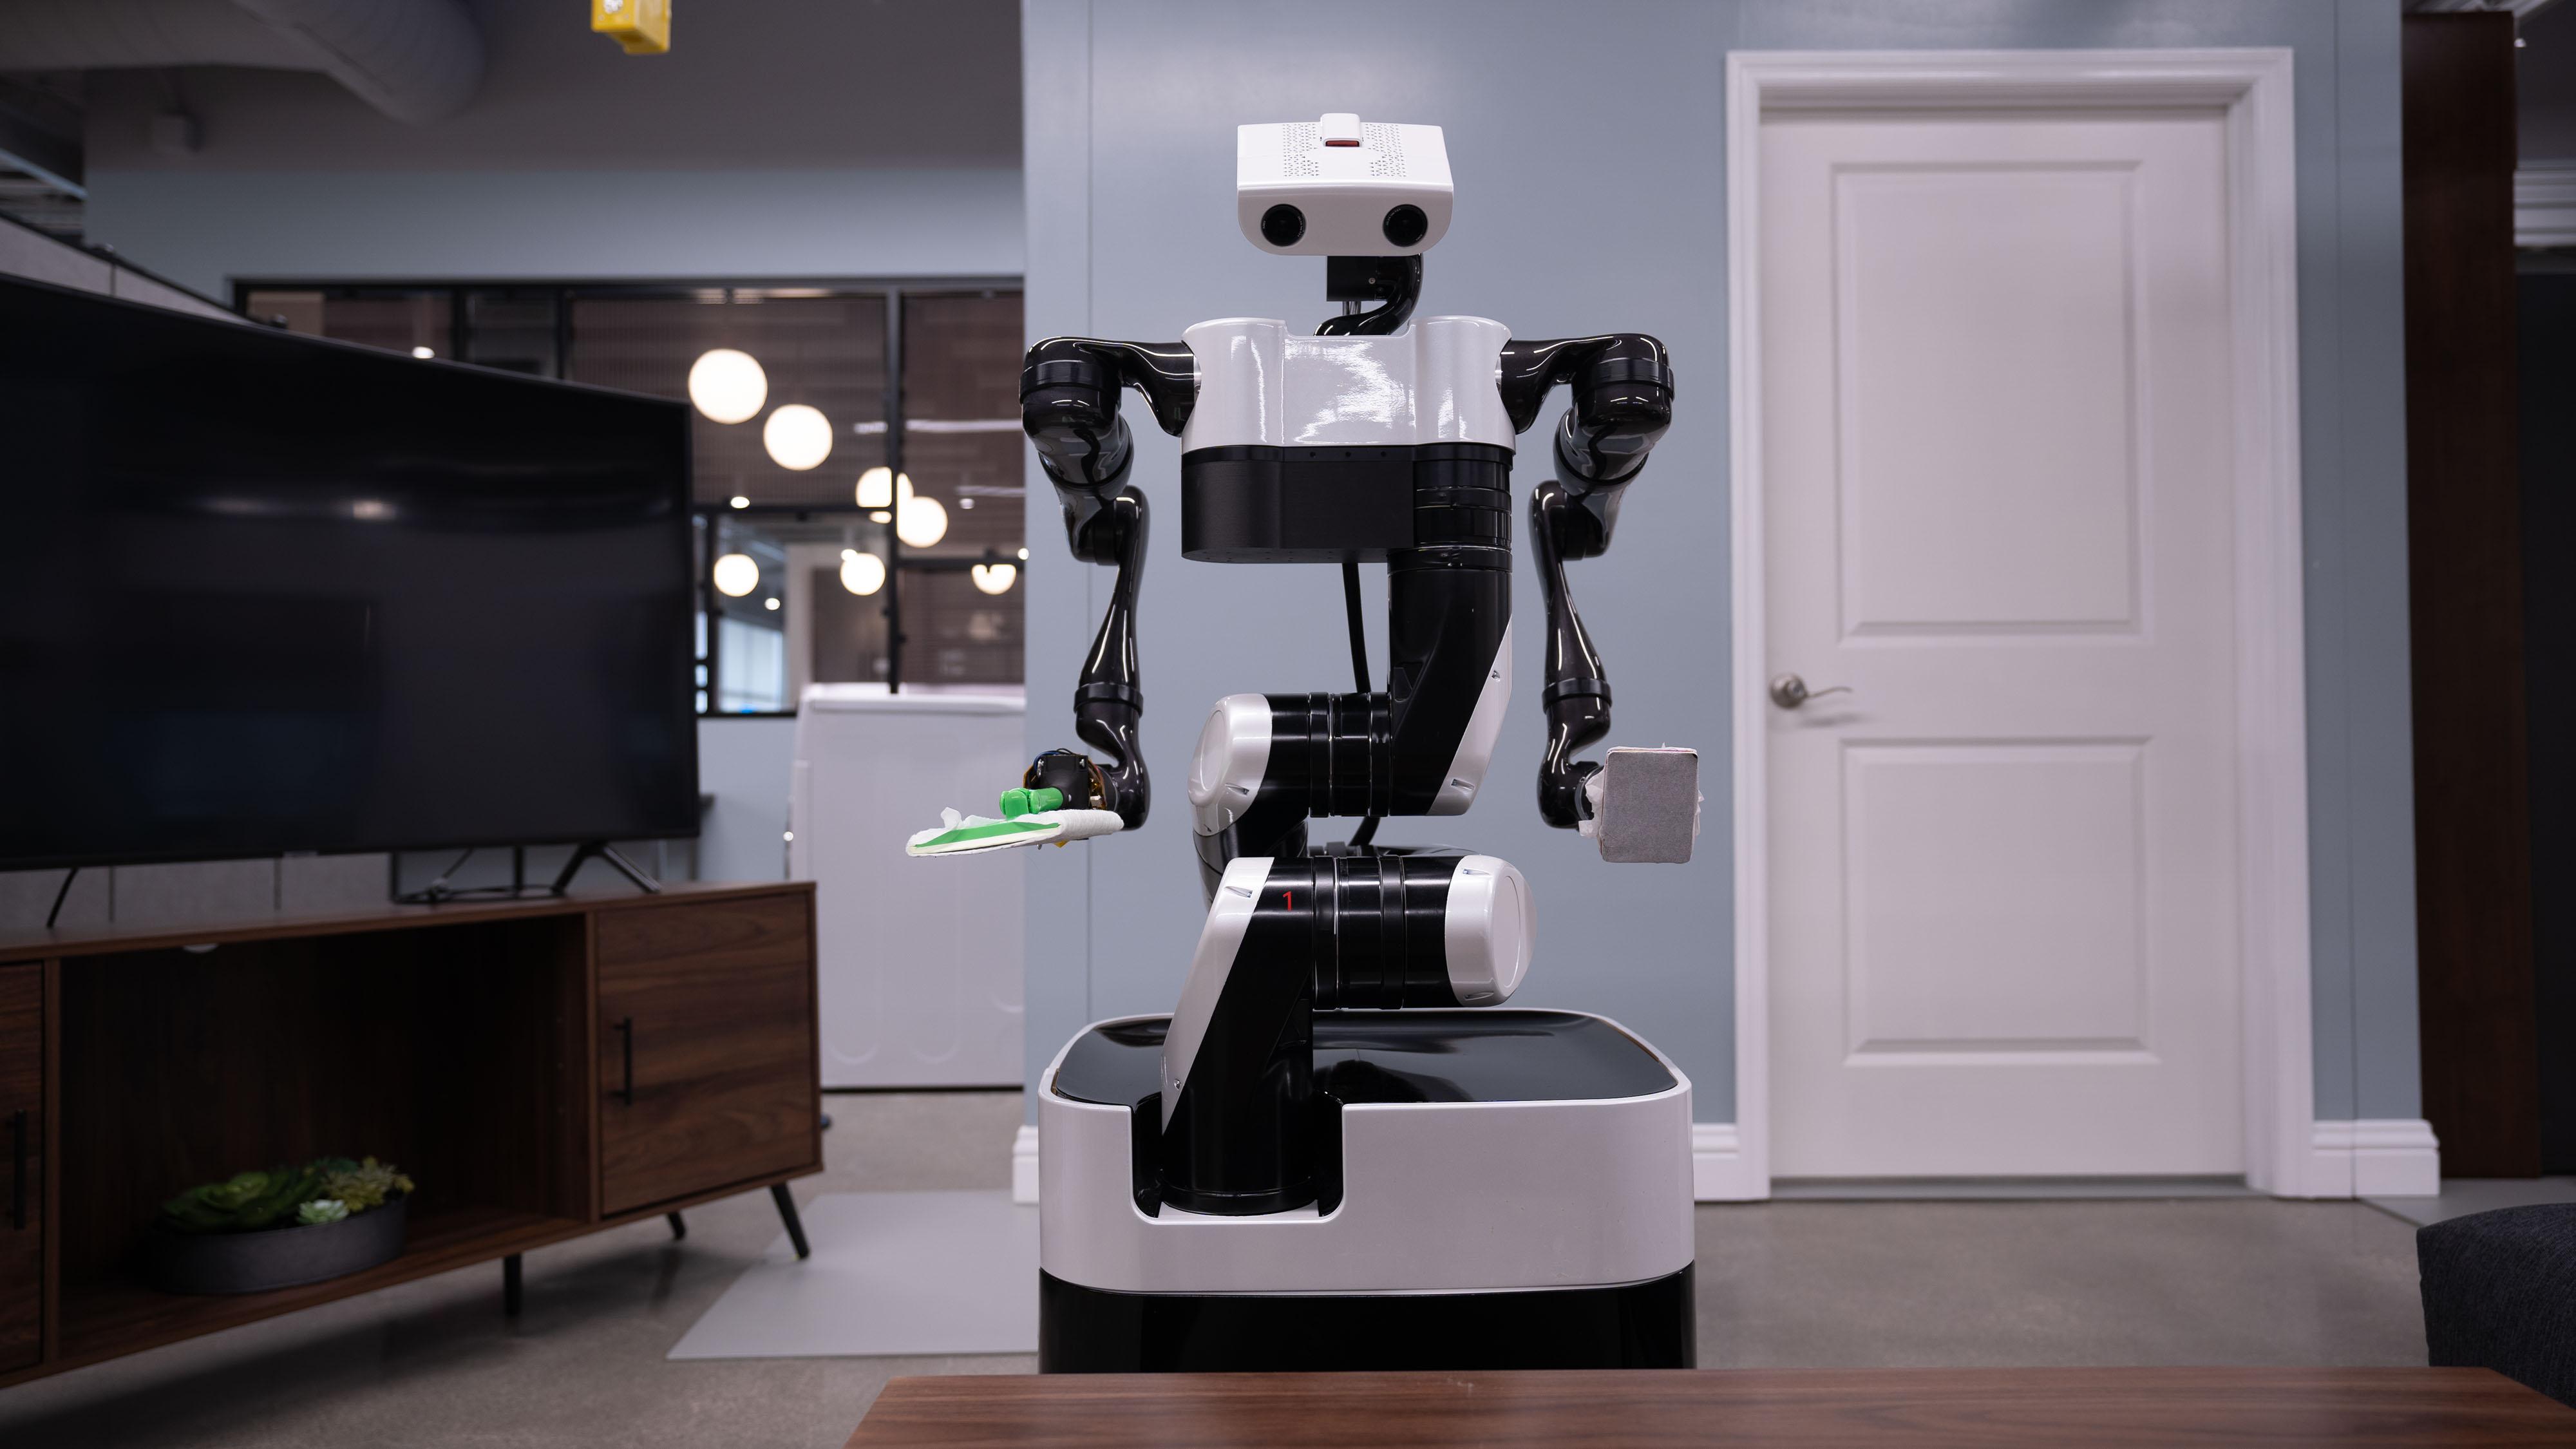 Toyota Research Institute Showcases Latest Robotics Research Aimed at Amplifying Human Ability in the Home